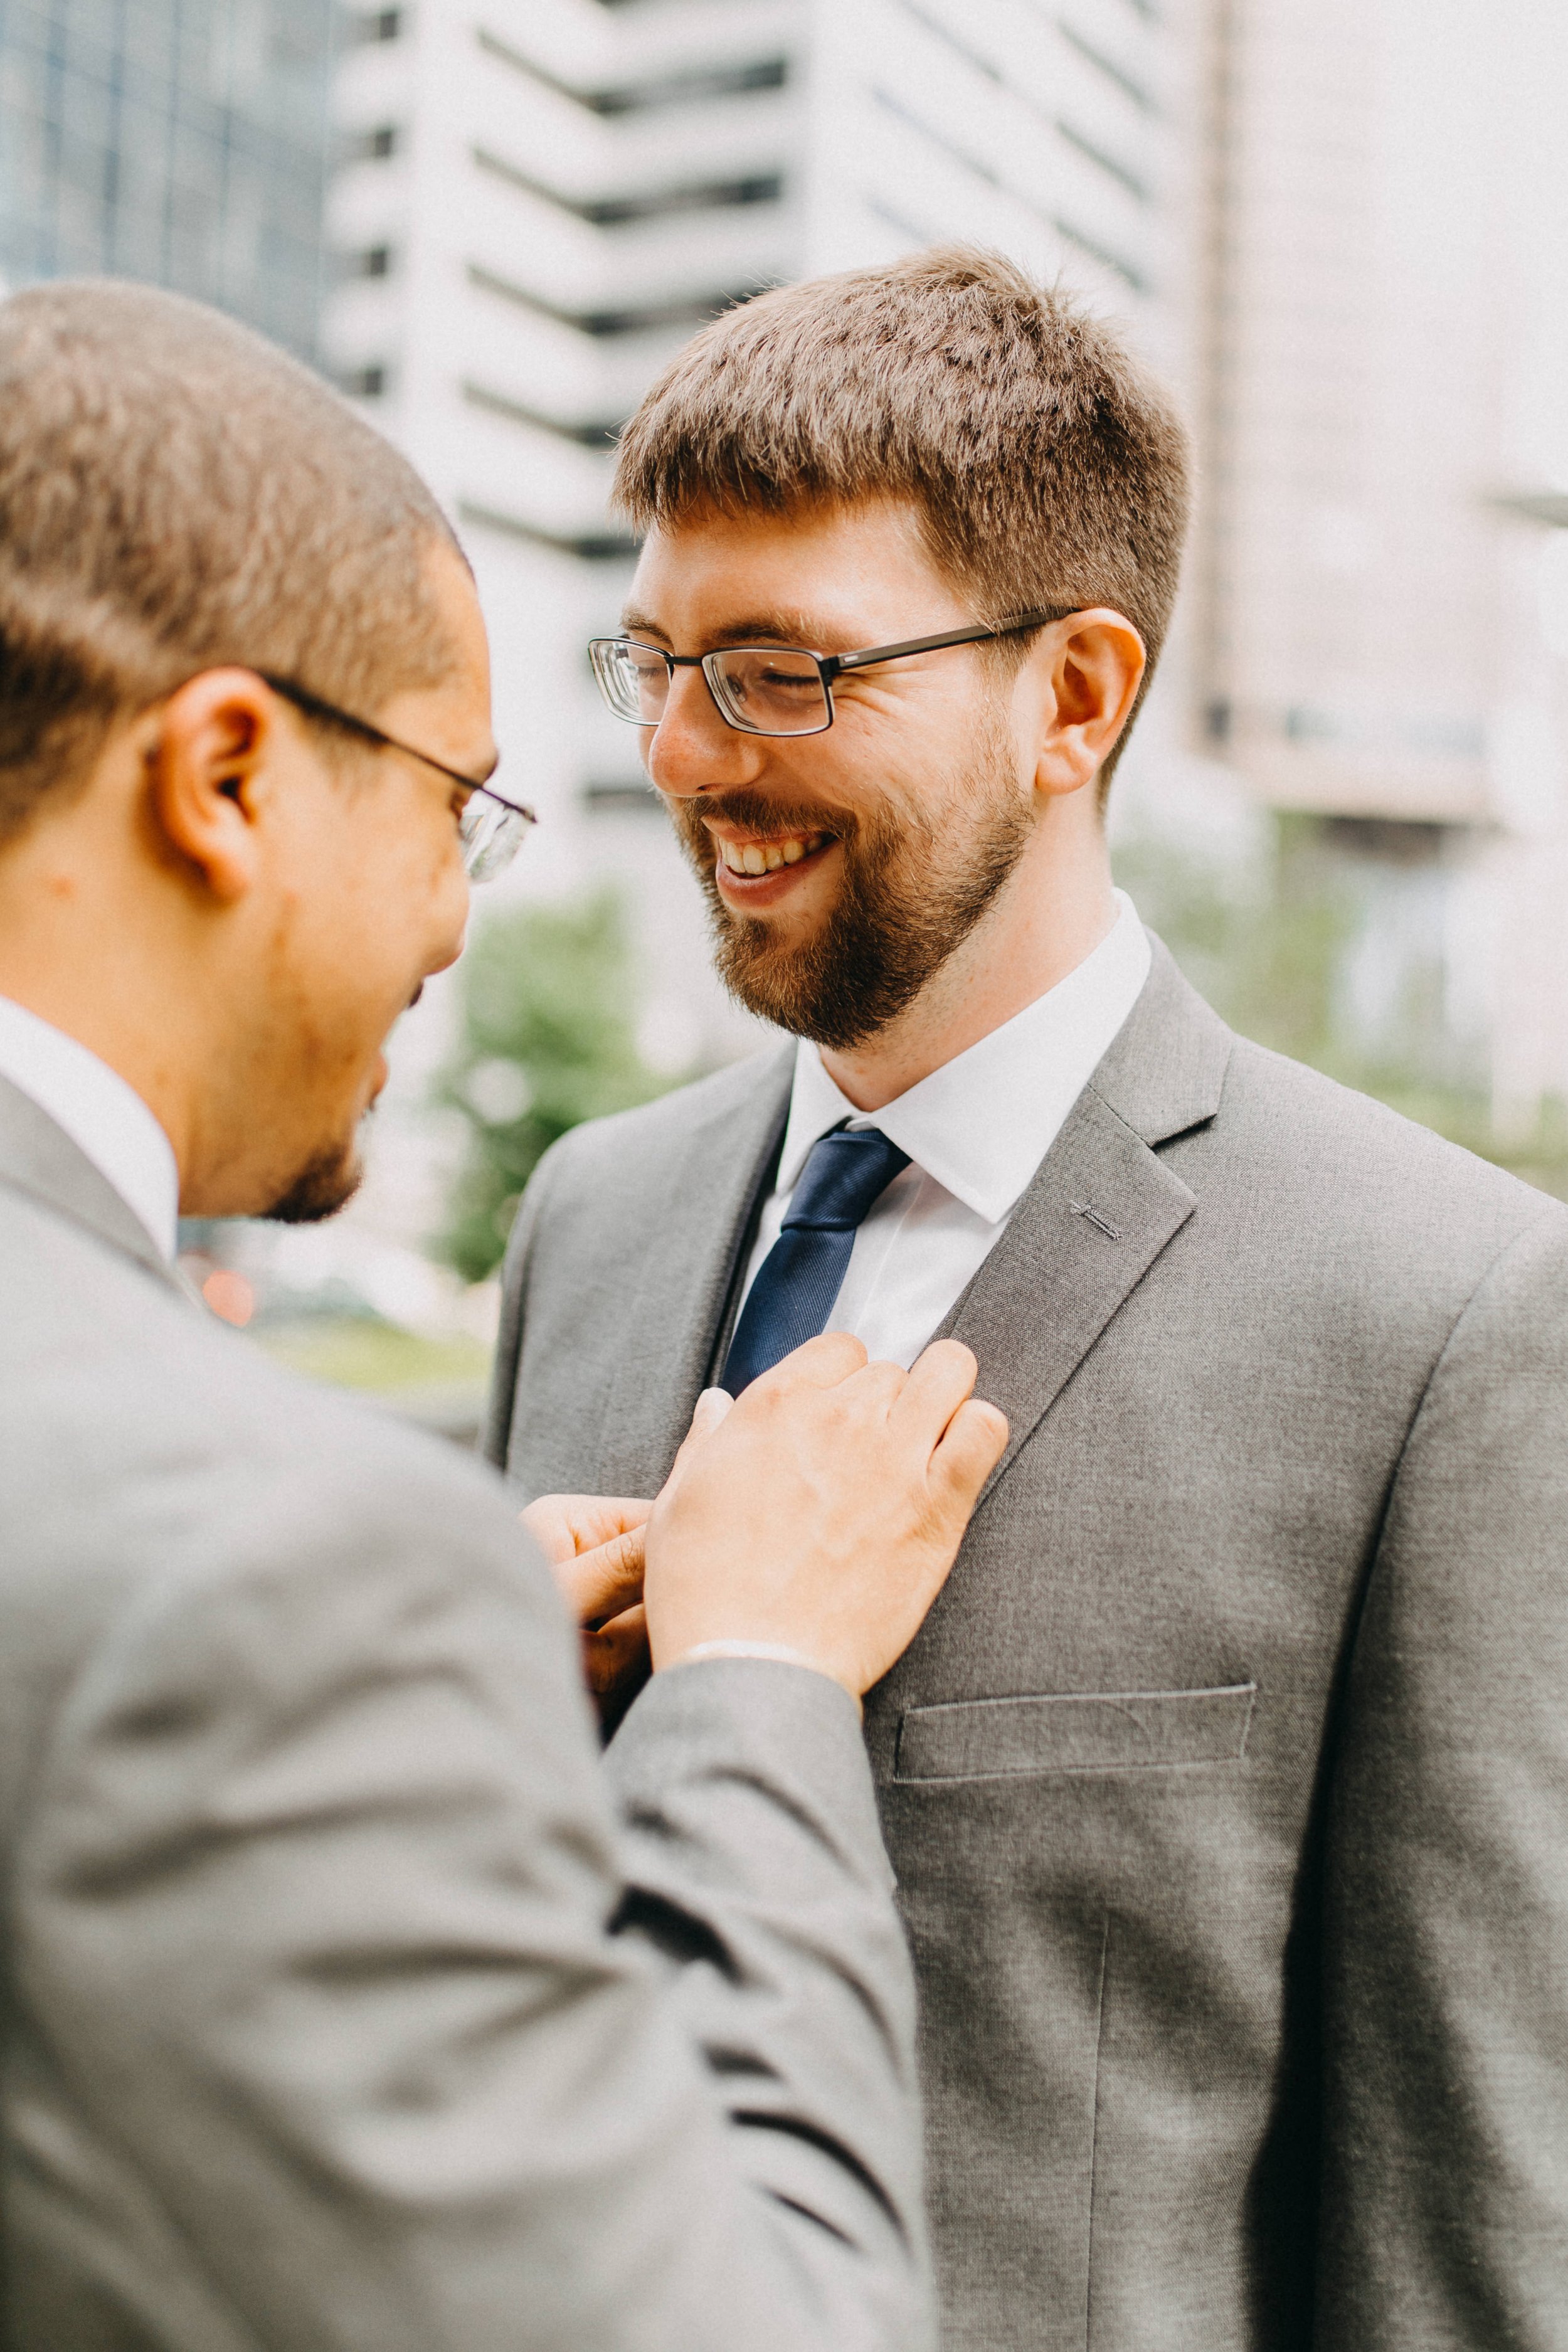  A groom is smiling while his future husband adjusts his tie. 